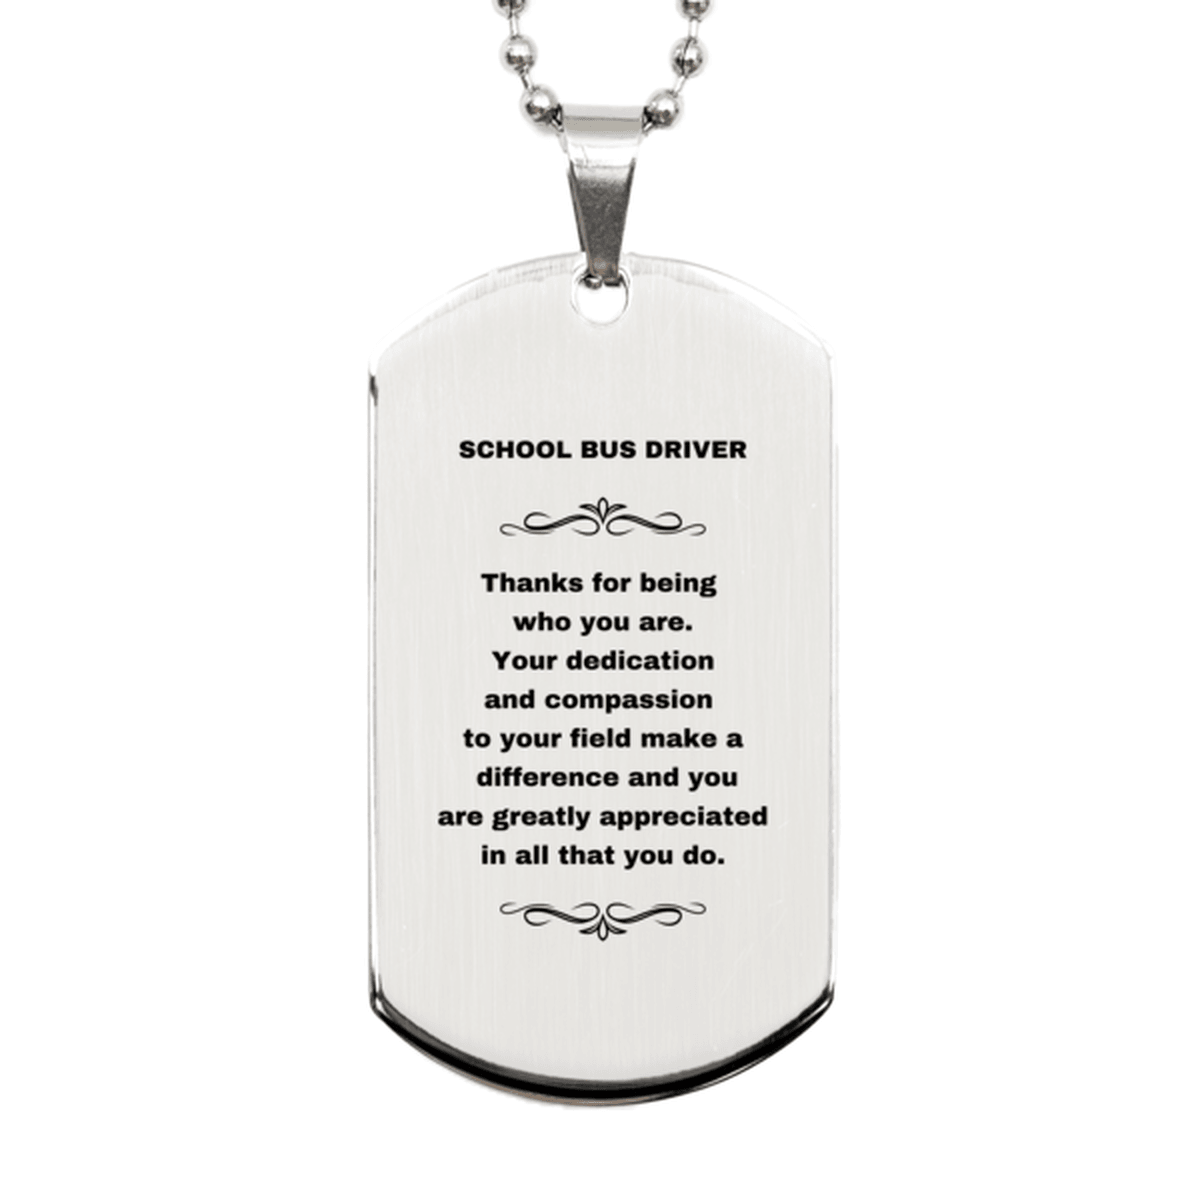 School Bus Driver Silver Engraved Dog Tag Necklace - Thanks for being who you are - Birthday Christmas Jewelry Gifts Coworkers Colleague Boss - Mallard Moon Gift Shop